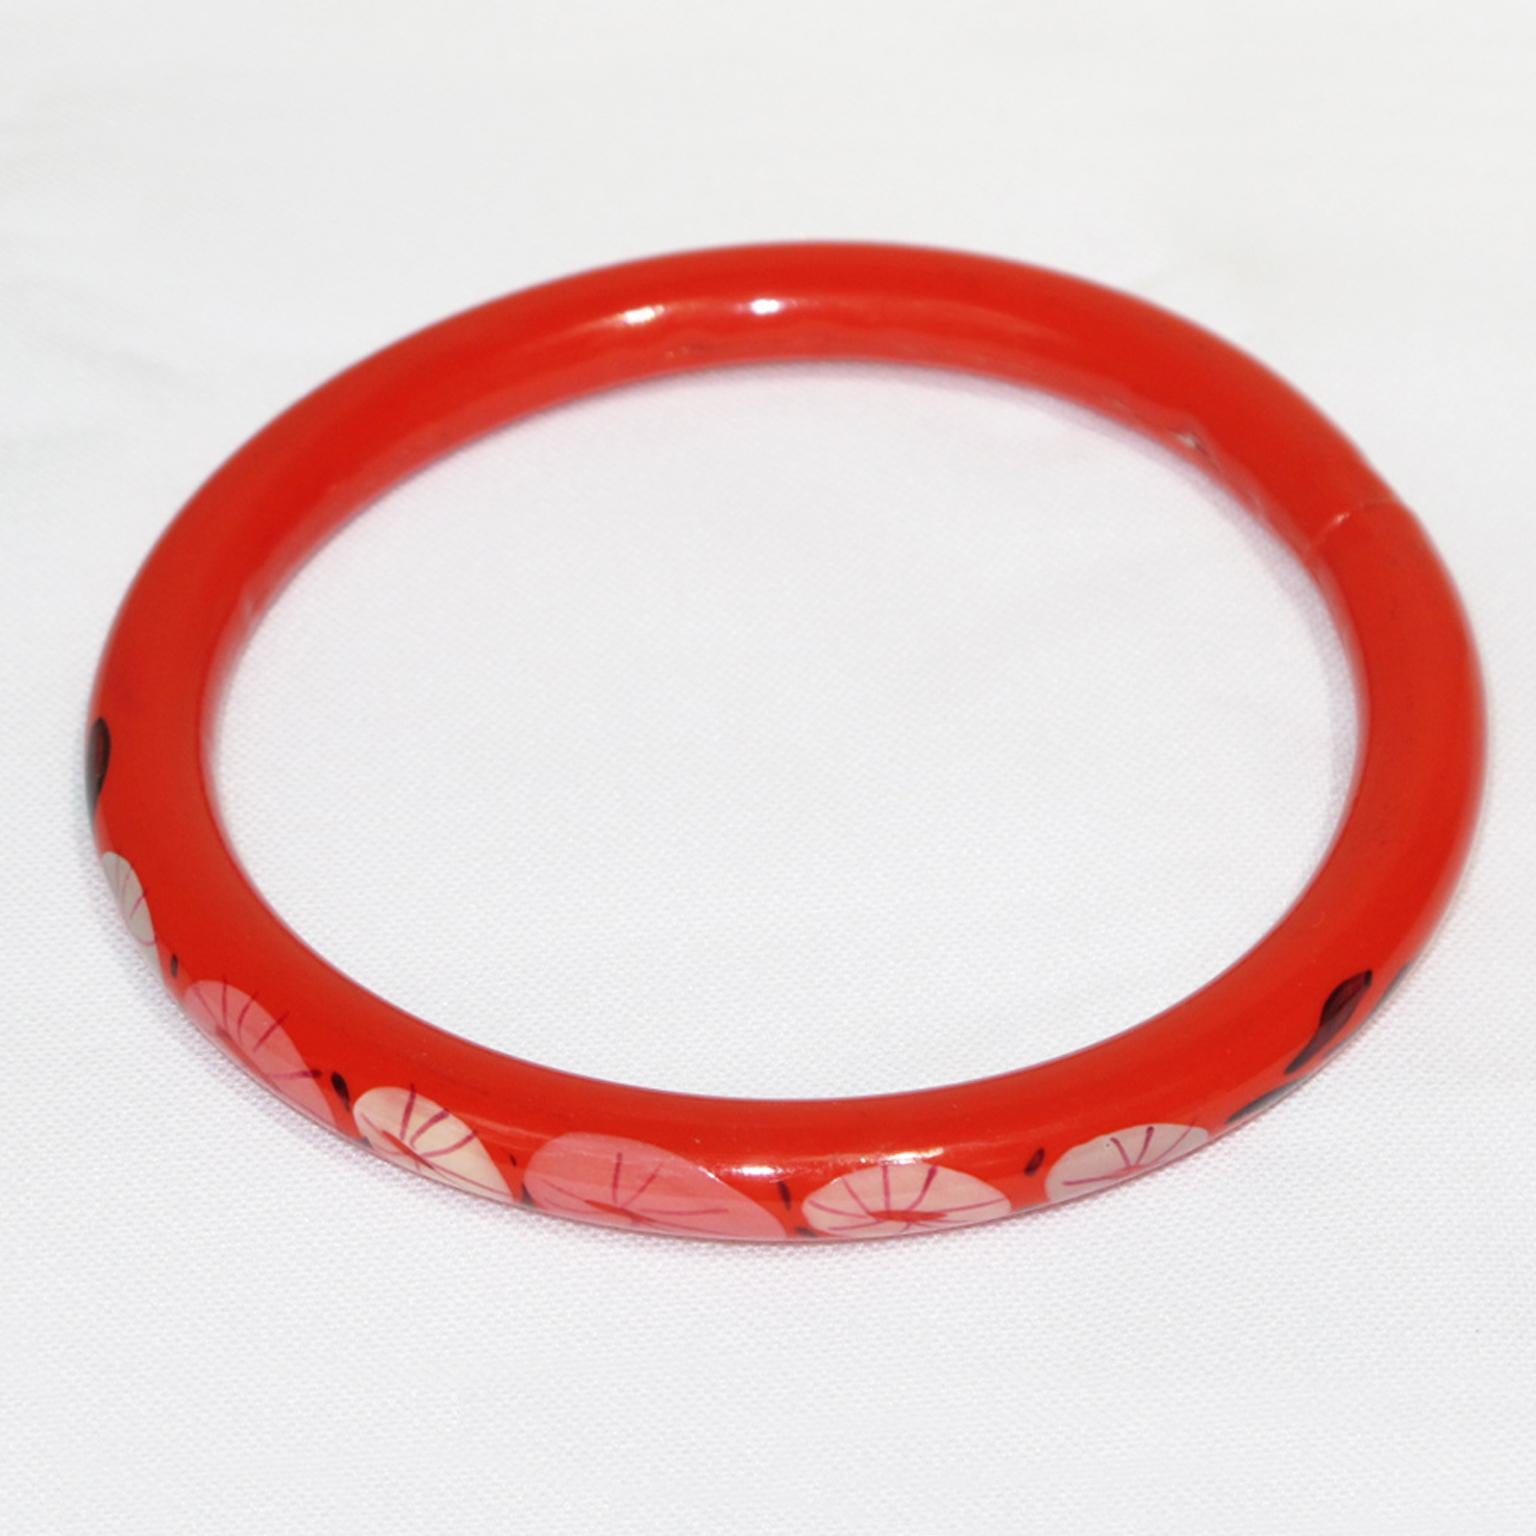 This lovely 1920s French Art Deco celluloid bracelet bangle features a light hollow tube shape with a floral design on one side of the bracelet. 
The hollow bracelet technique is an ancient technique applied to jewelry at the turn of the 20th